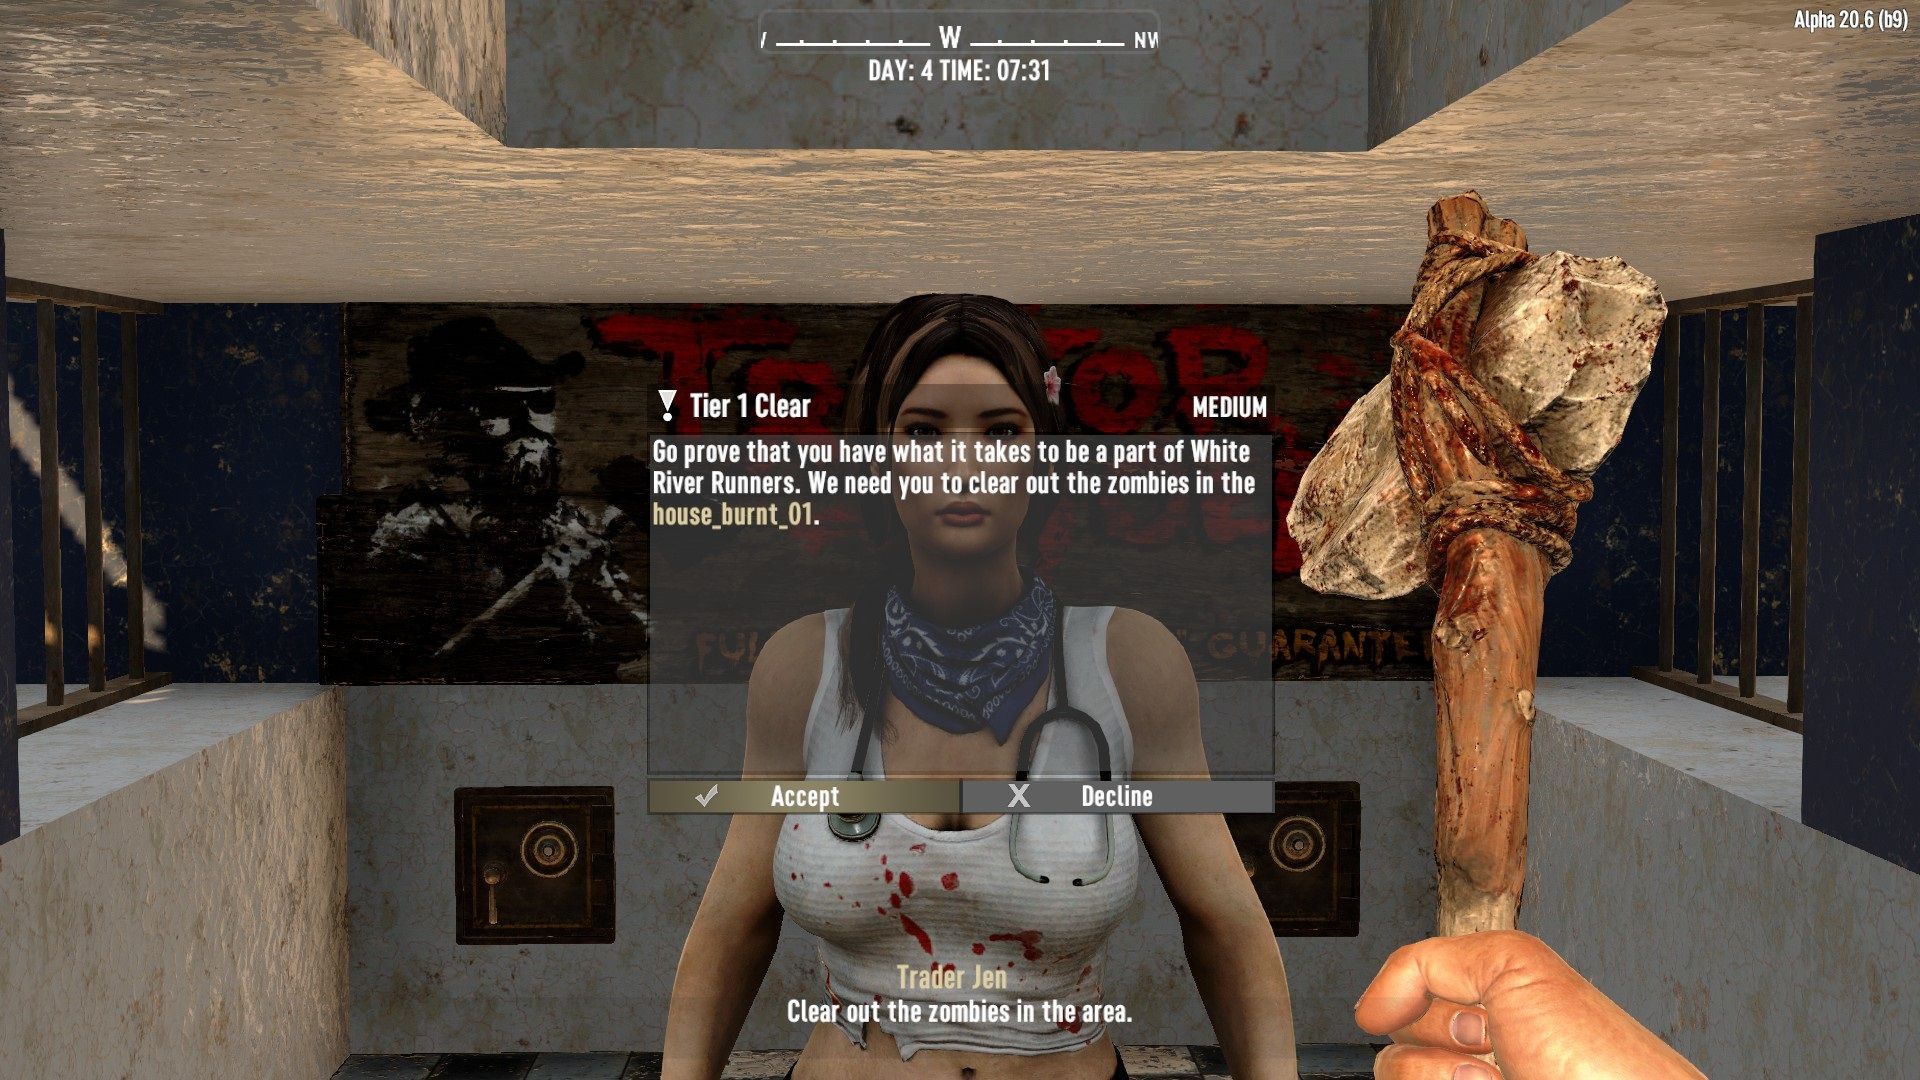 trader and mission 7 days to die.jpg